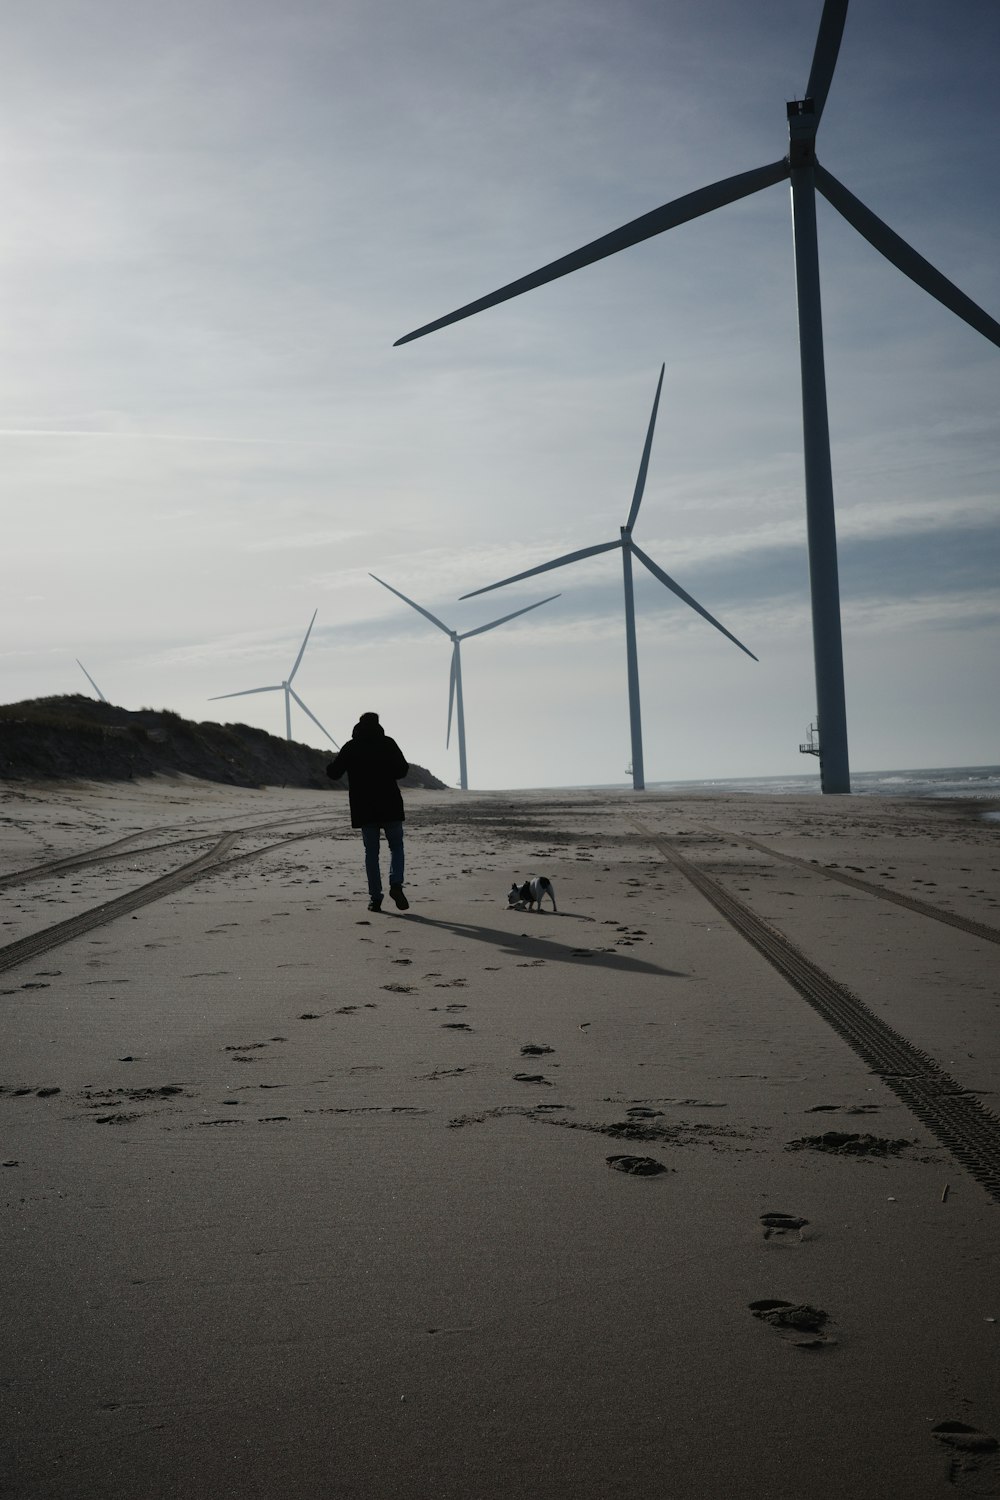 a person walking a dog on a beach with wind turbines in the background